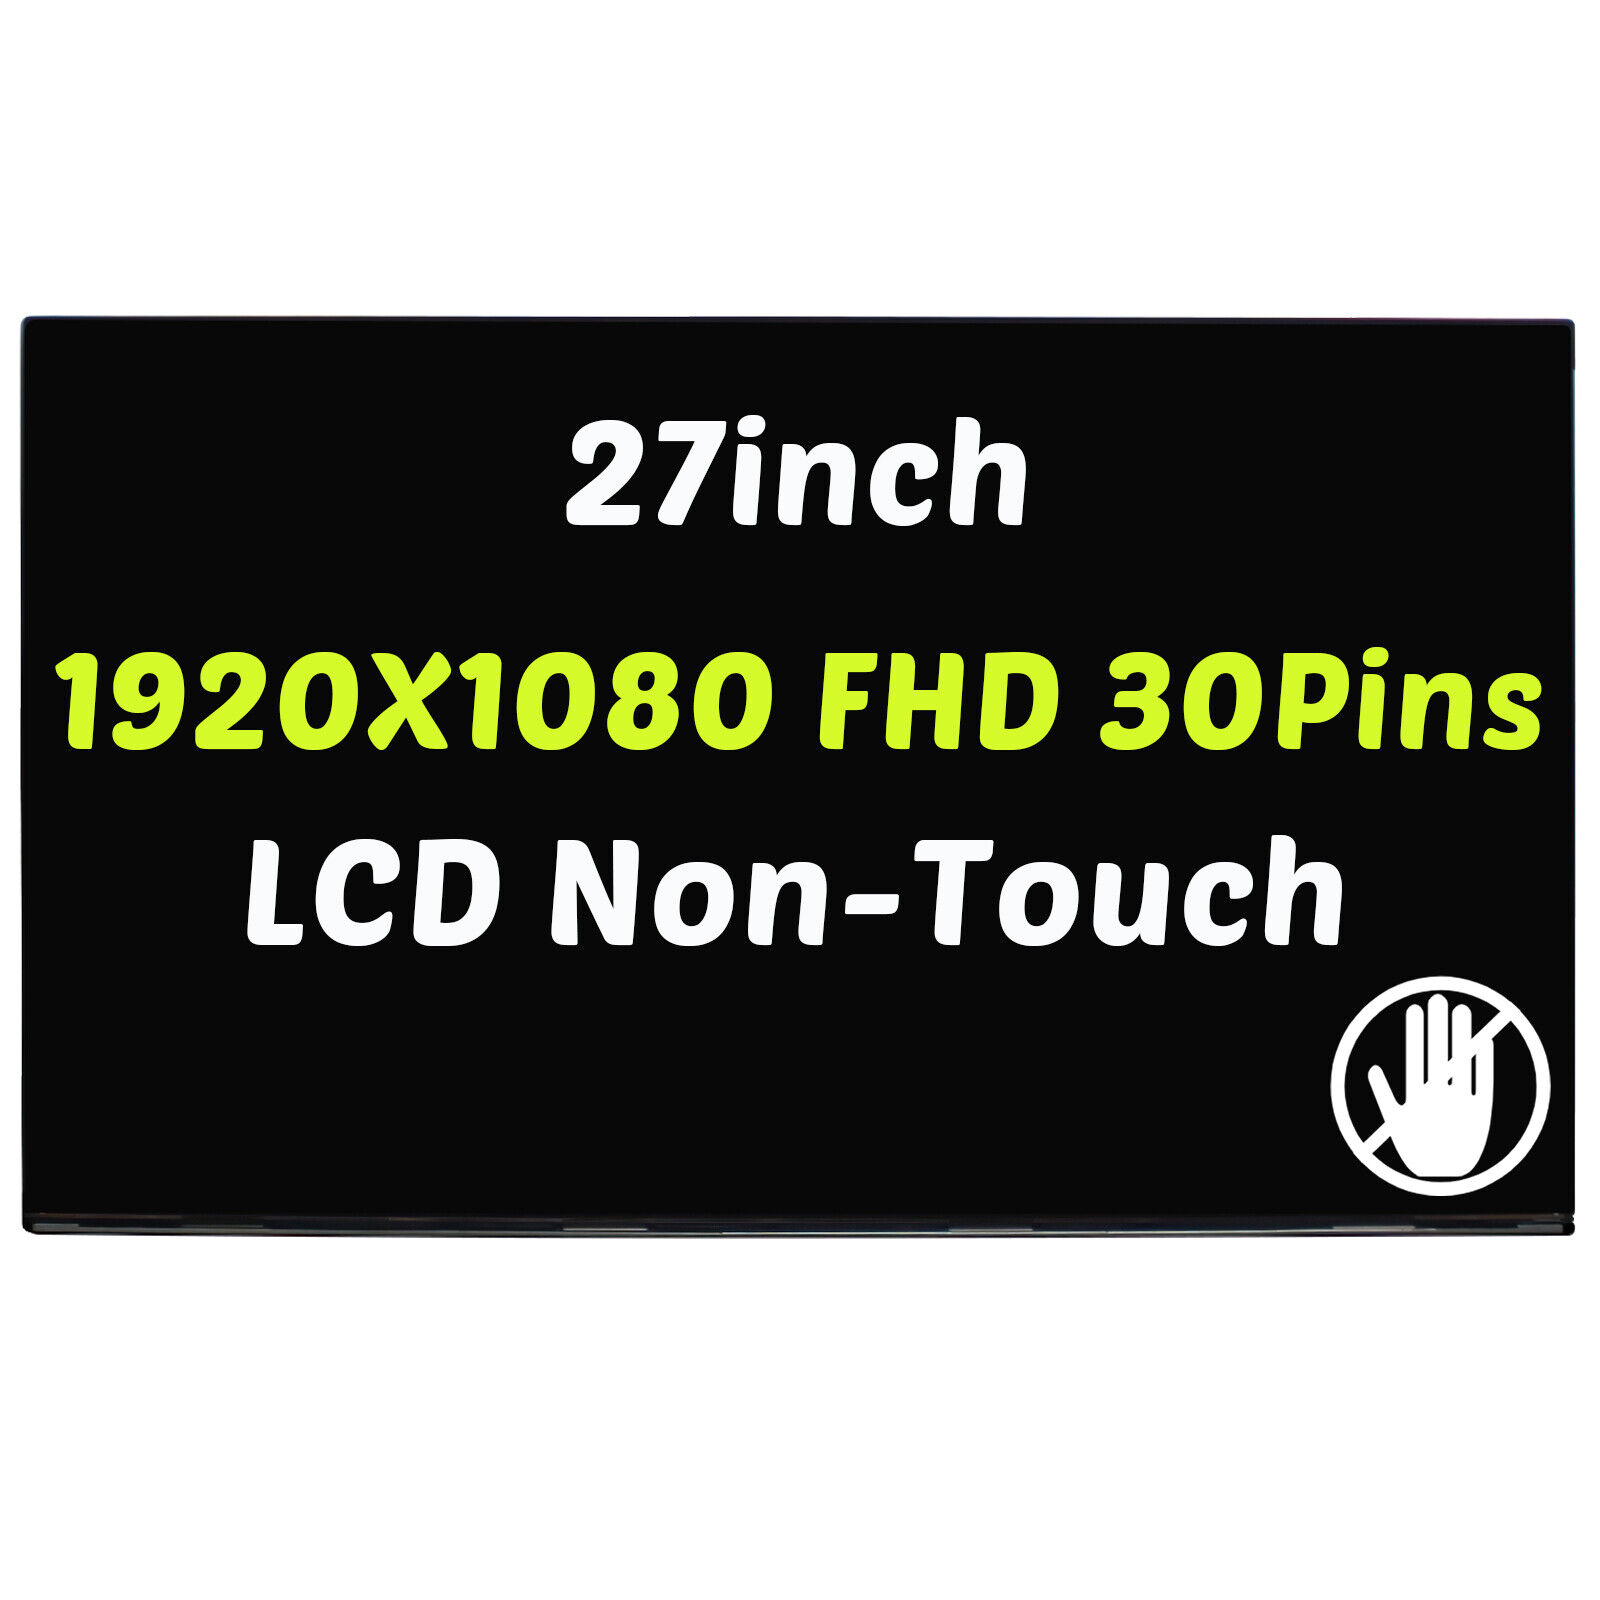 27inch LED LCD Display FHD 30Pins Non-Touch for HP 27-C 27-CB0030 27-CB0052